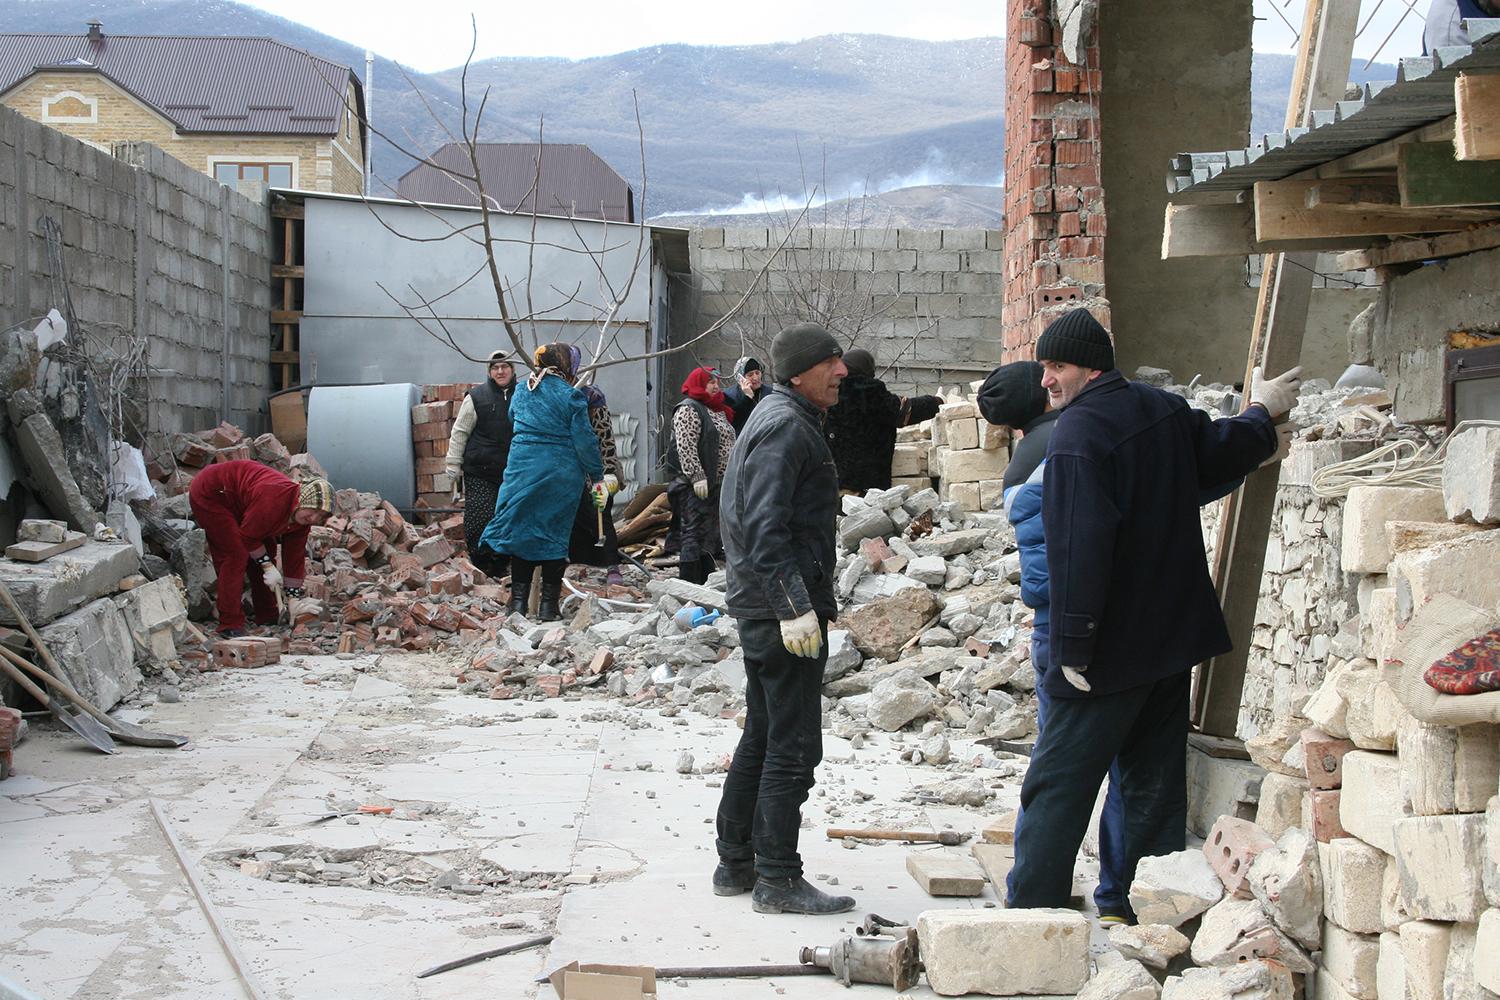 Local residents cleaning up the debris of a house destroyed in a counterinsurgency operation in Novyi Agachaul, Dagestan, February 2014.  © 2014 Varvara Pakhomenko